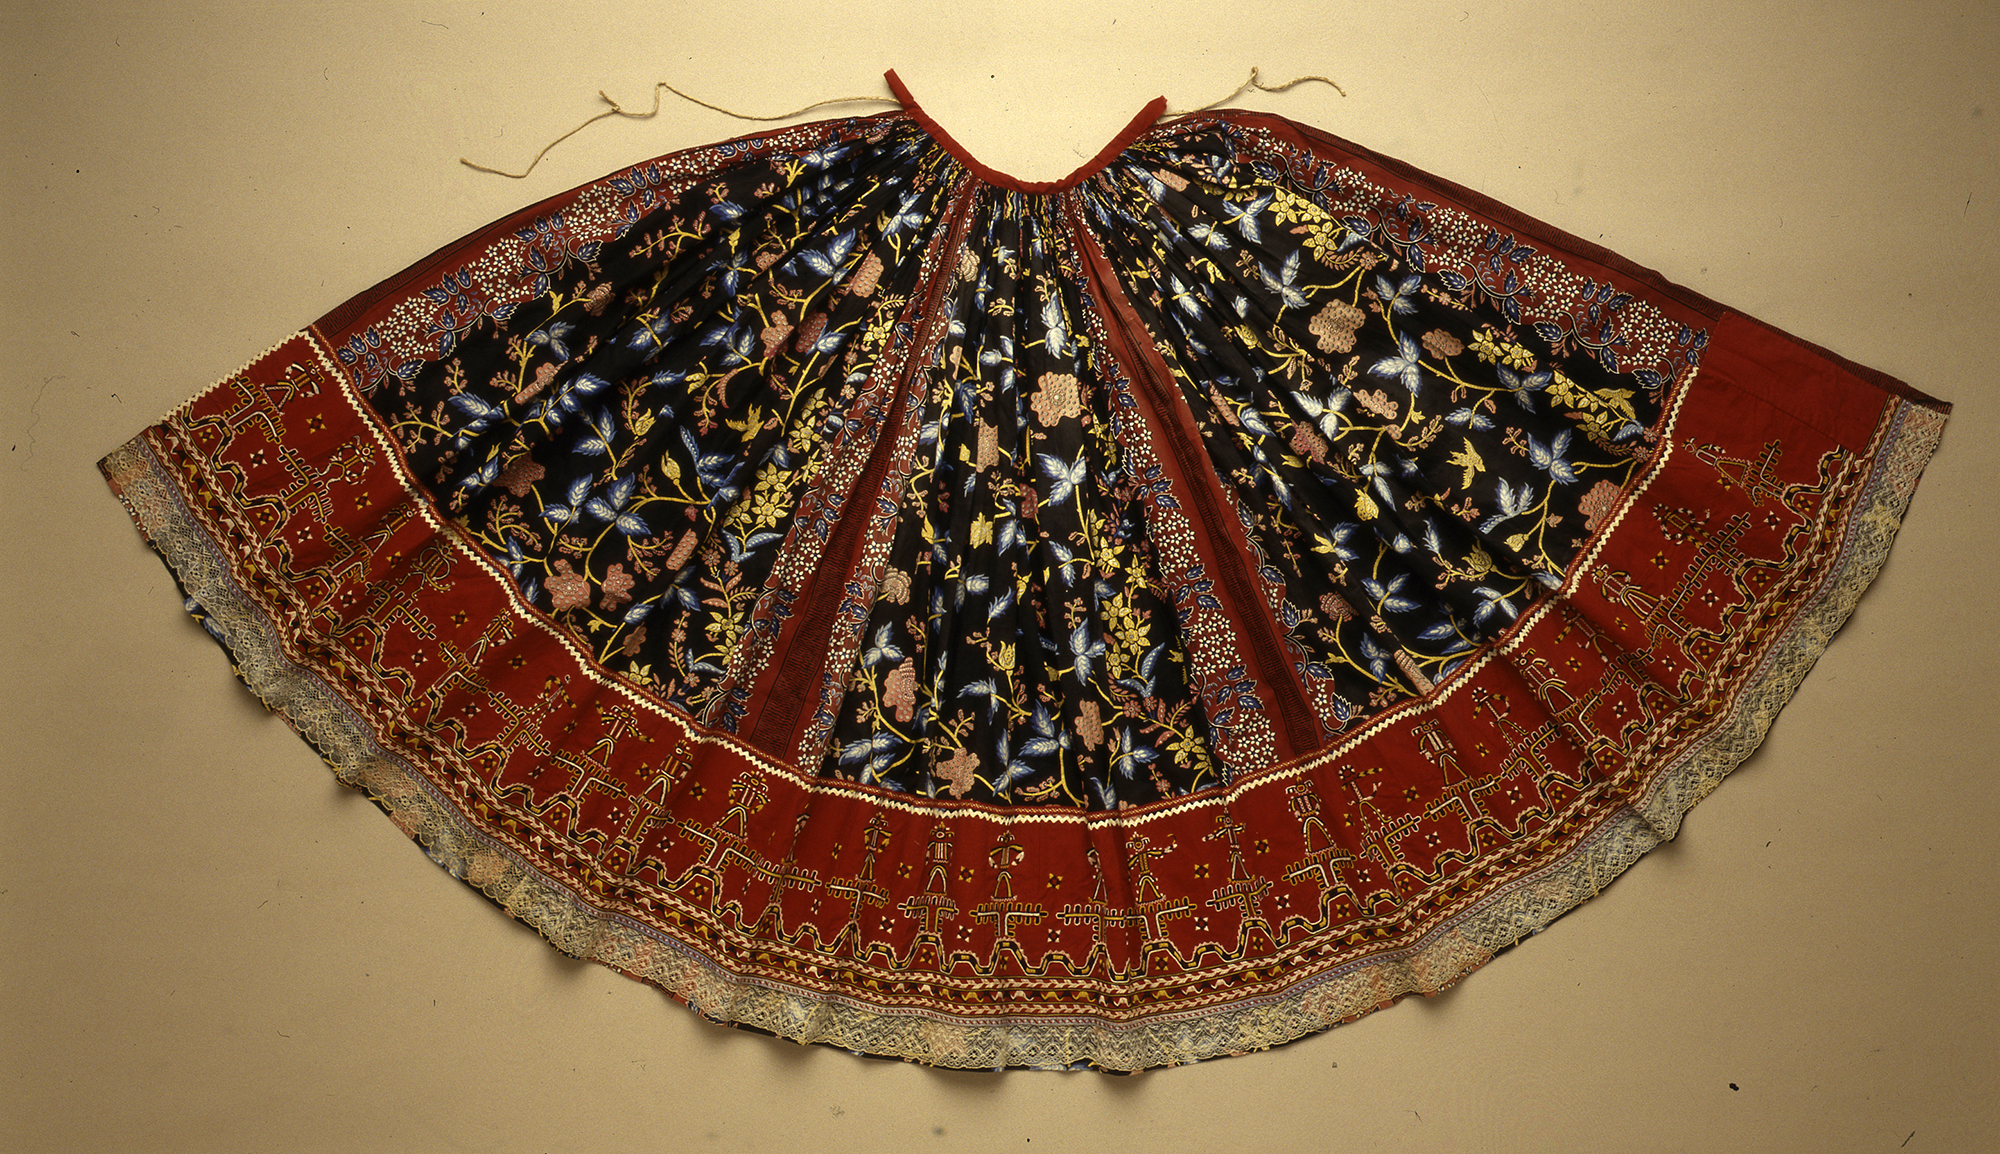 Woman's skirt of Chinese printed fabric, locally embroidered lower portion and imported lace trim 